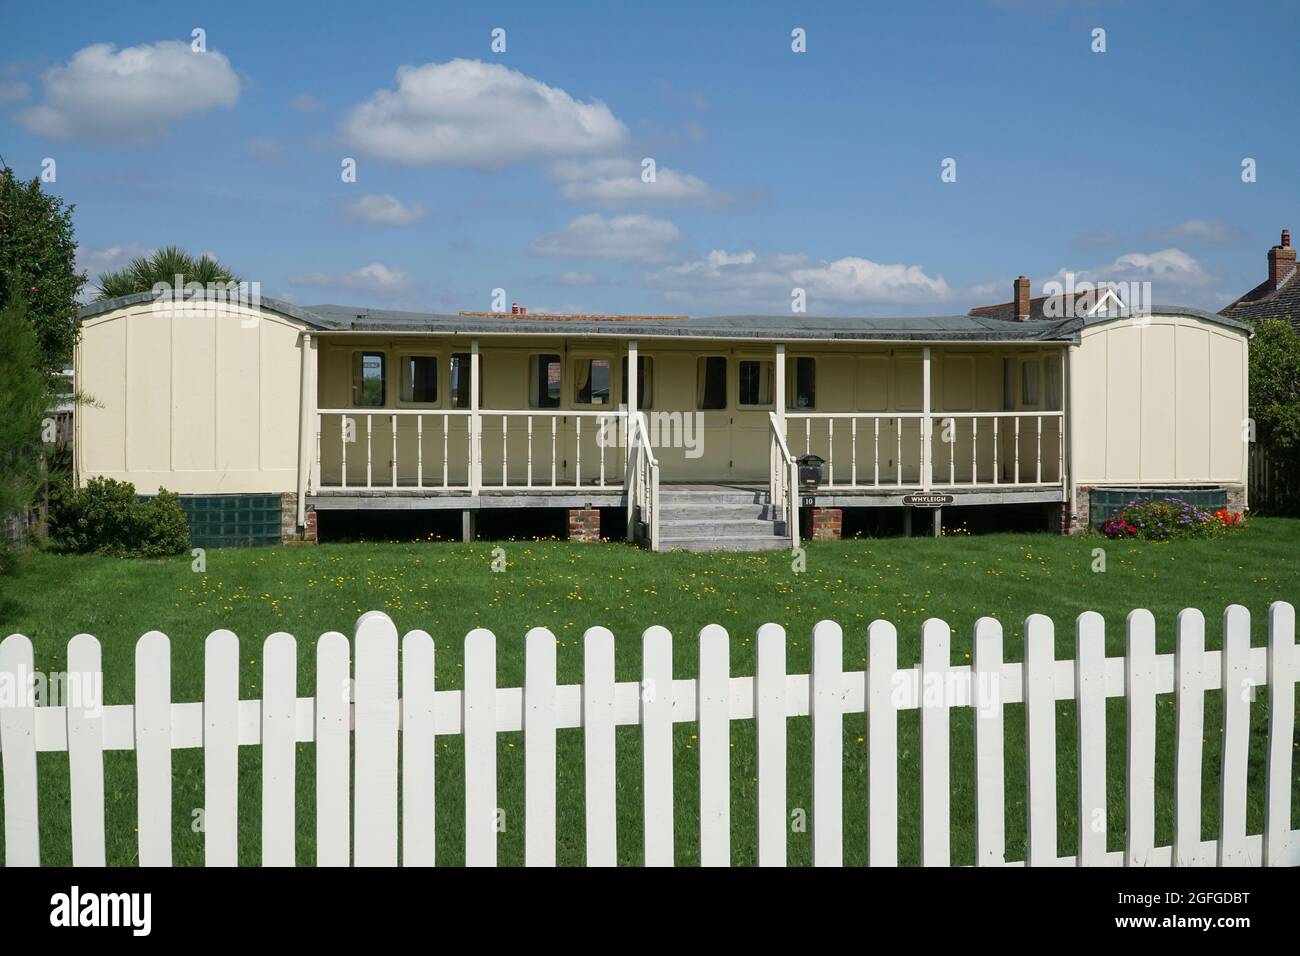 East Wittering, UK, 25 August 2021: In the West Sussex village of East Wittering several homes have been built around disused railway carriages. This Stock Photo